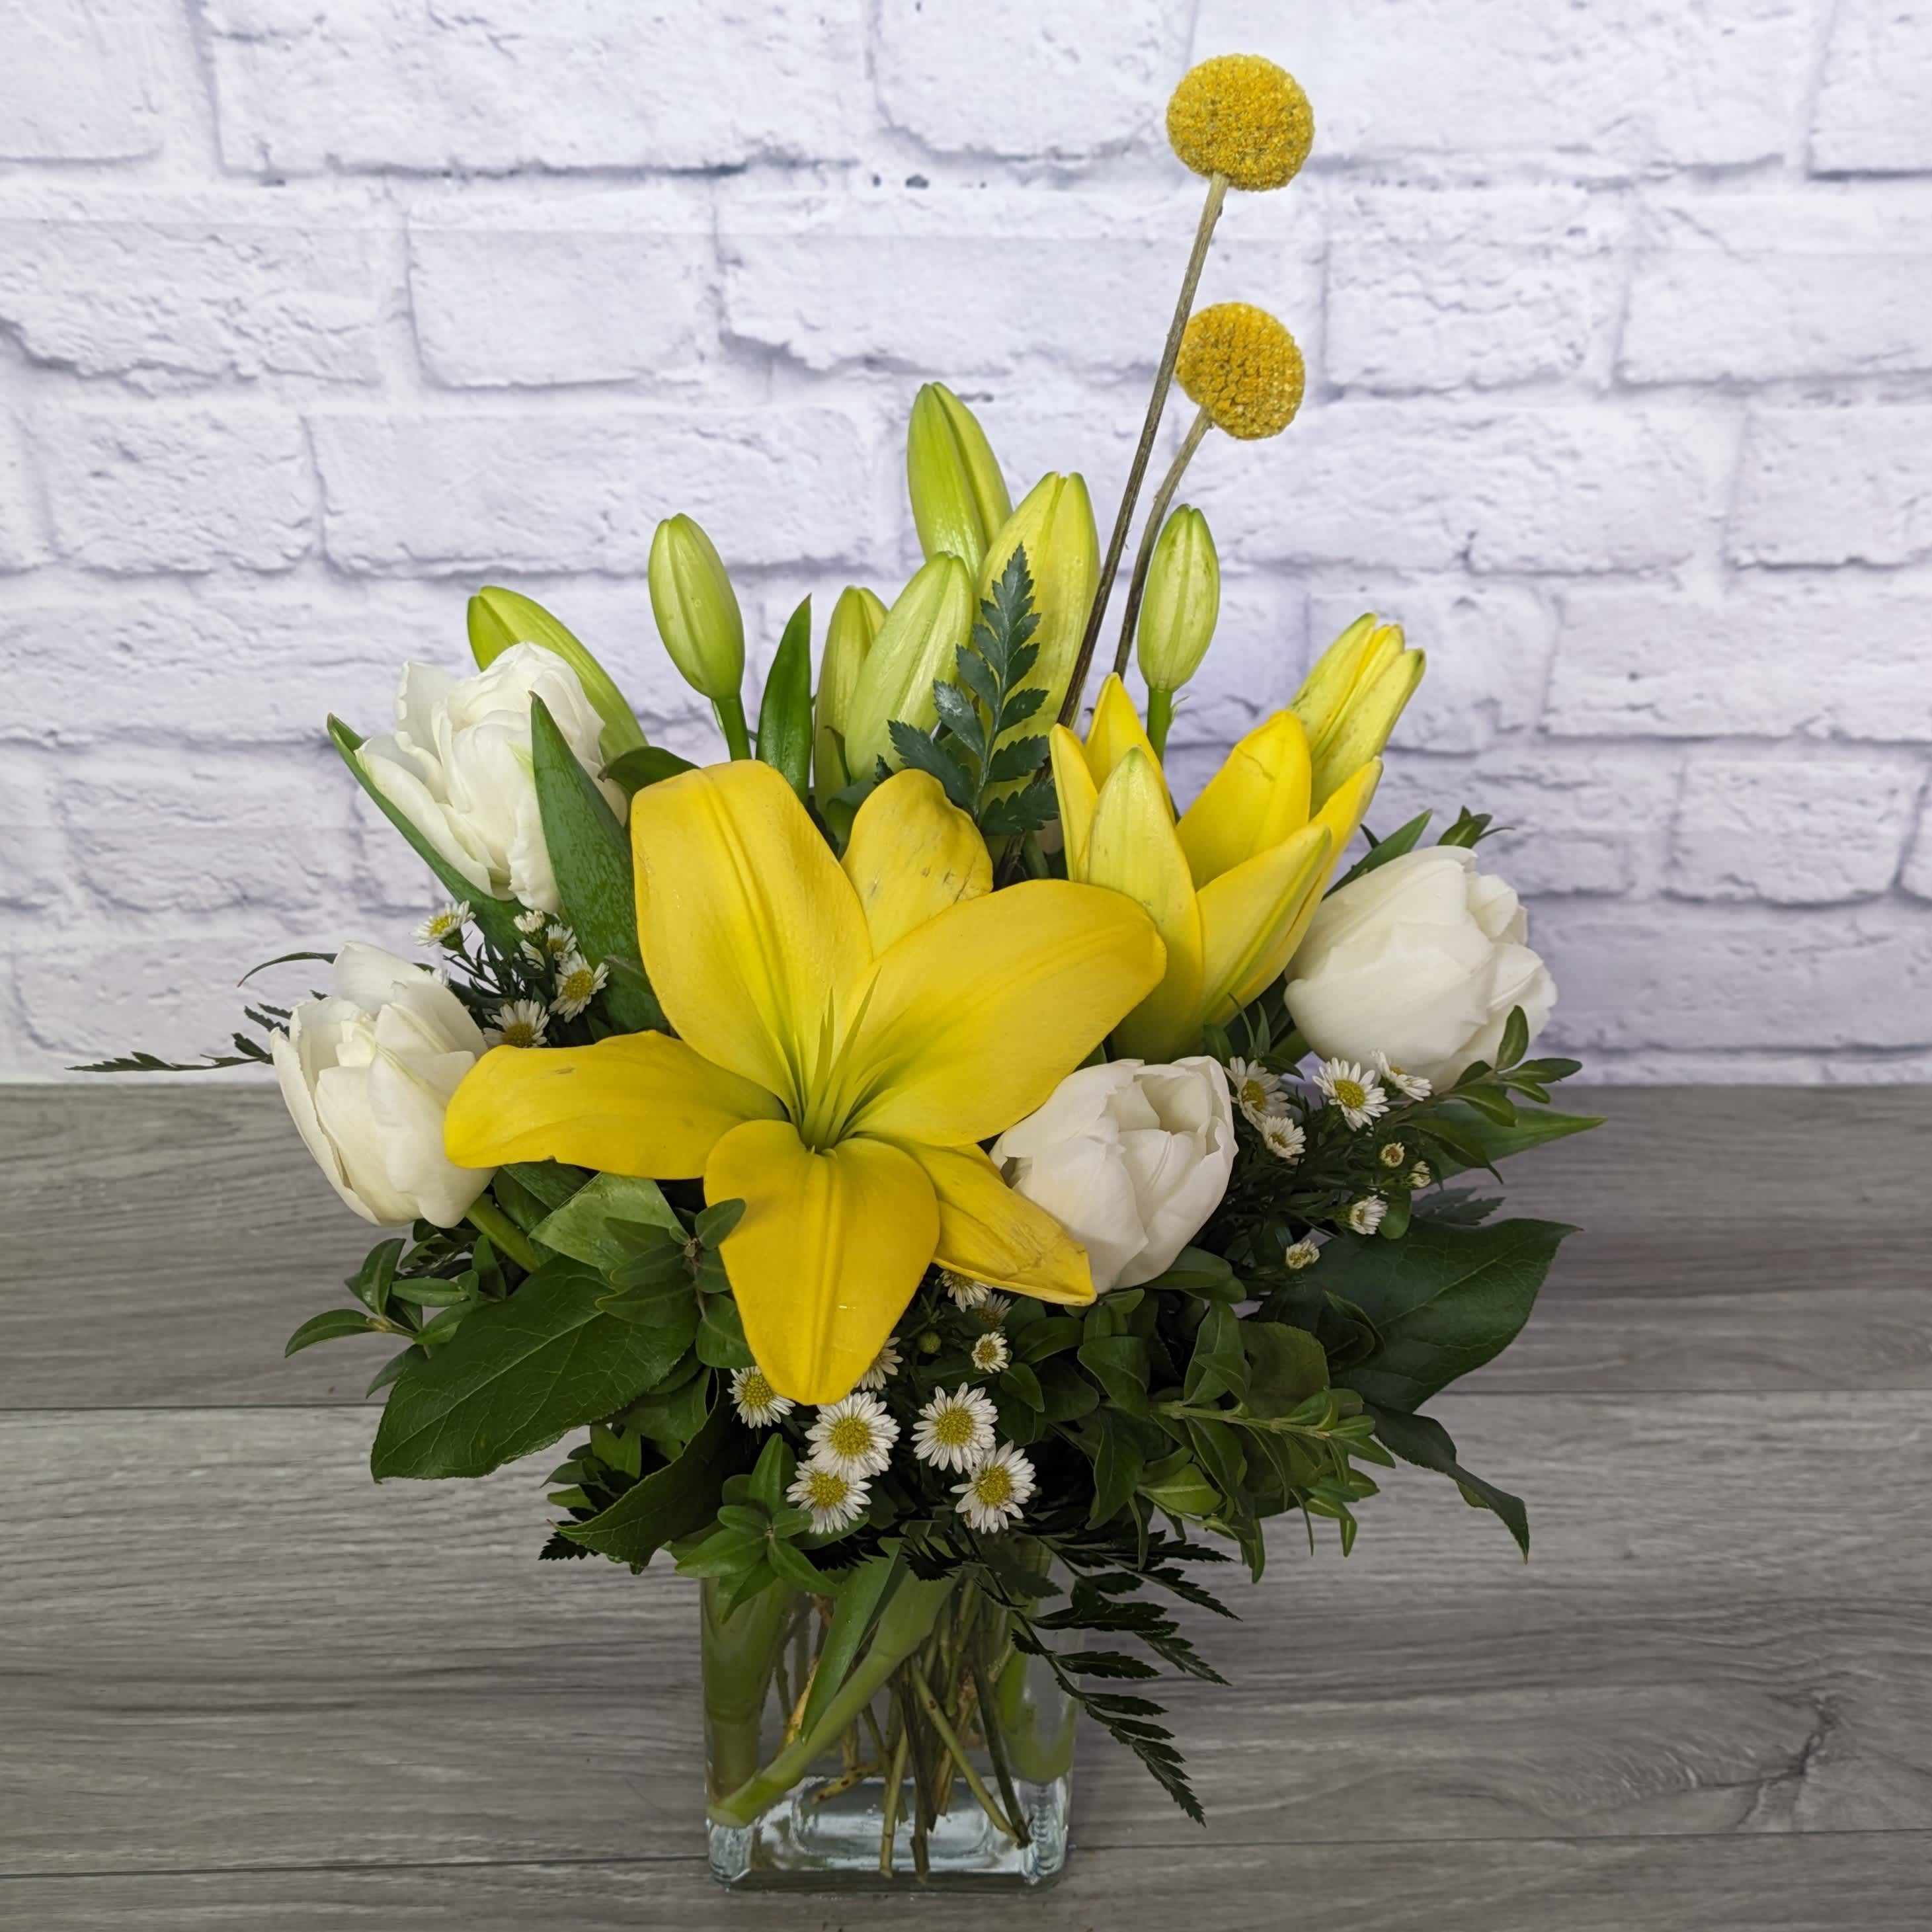 Sunny Revelry - Sunny Revelry is A Ladybug Floral exclusive spring bouquet. With solar spring in full swing, this bouquet is inspired by the longer and sunnier days soon to come. Featuring asiatic lilies, tulips, billy balls and monte casino aster. Featured in a 4&quot;x3&quot;x6&quot; Rectangle glass vase.  All Round Orientation 18&quot;H X 11&quot;W 